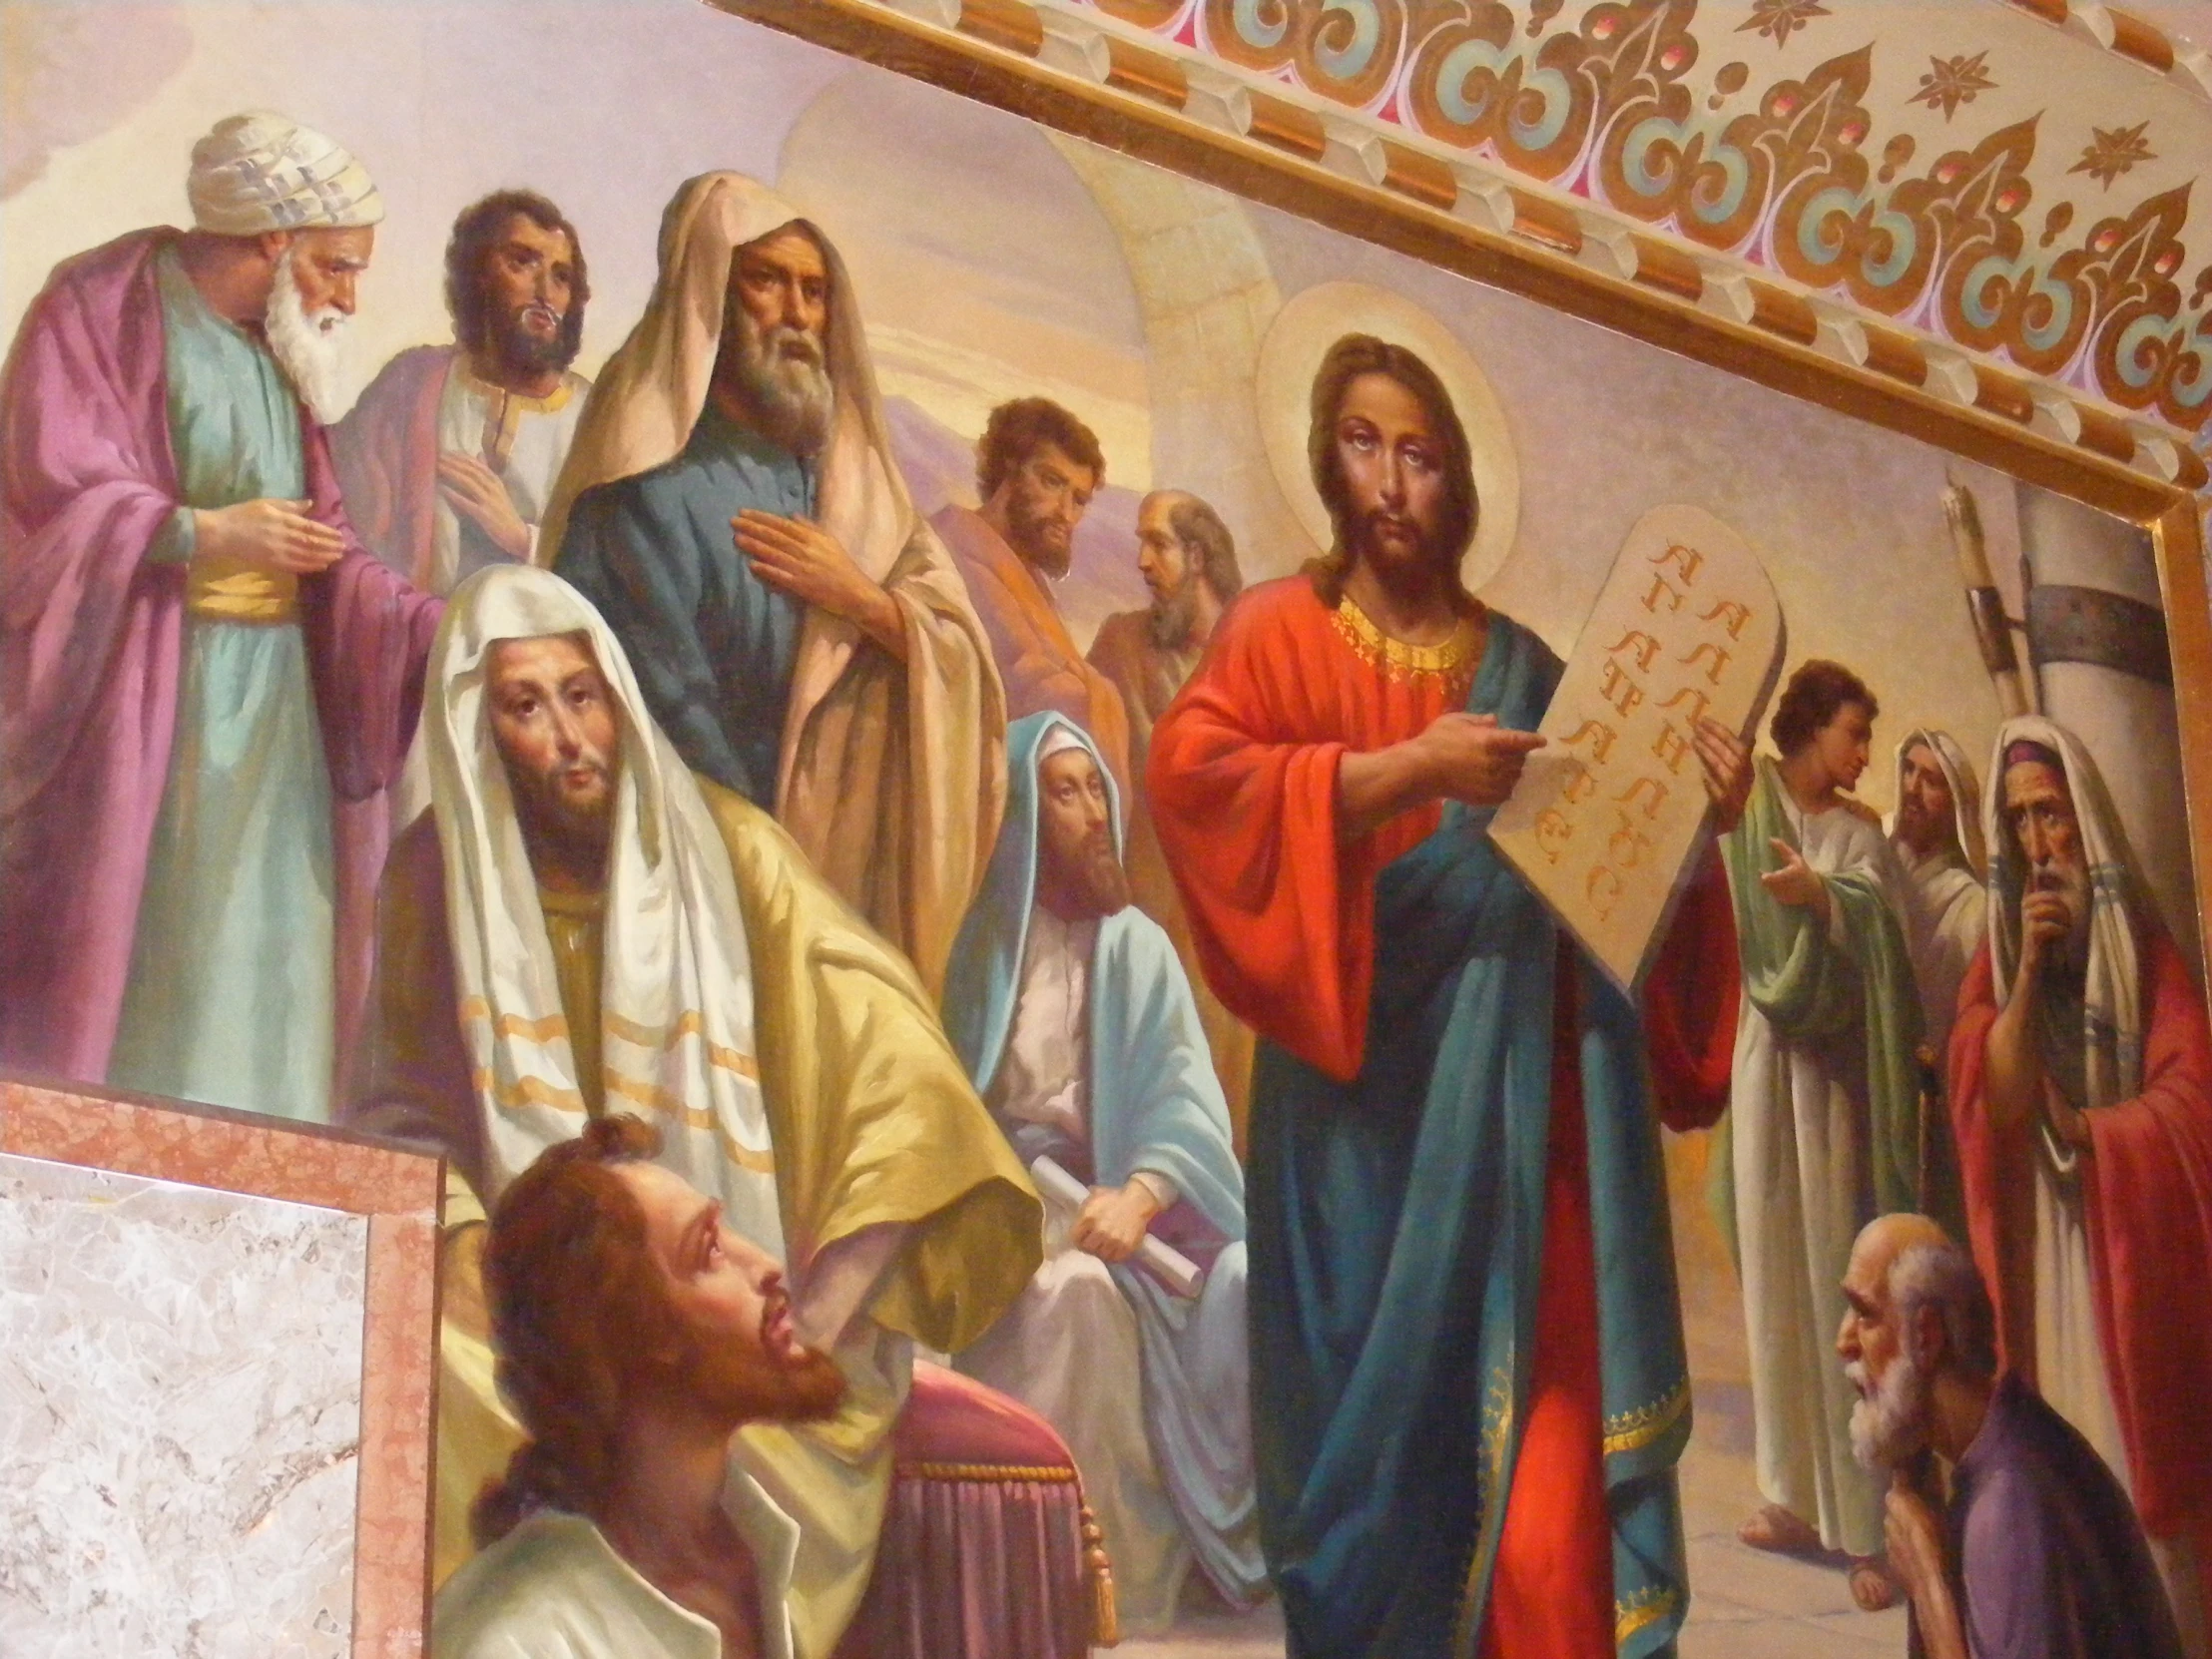 a painting on a wall of jesus and people